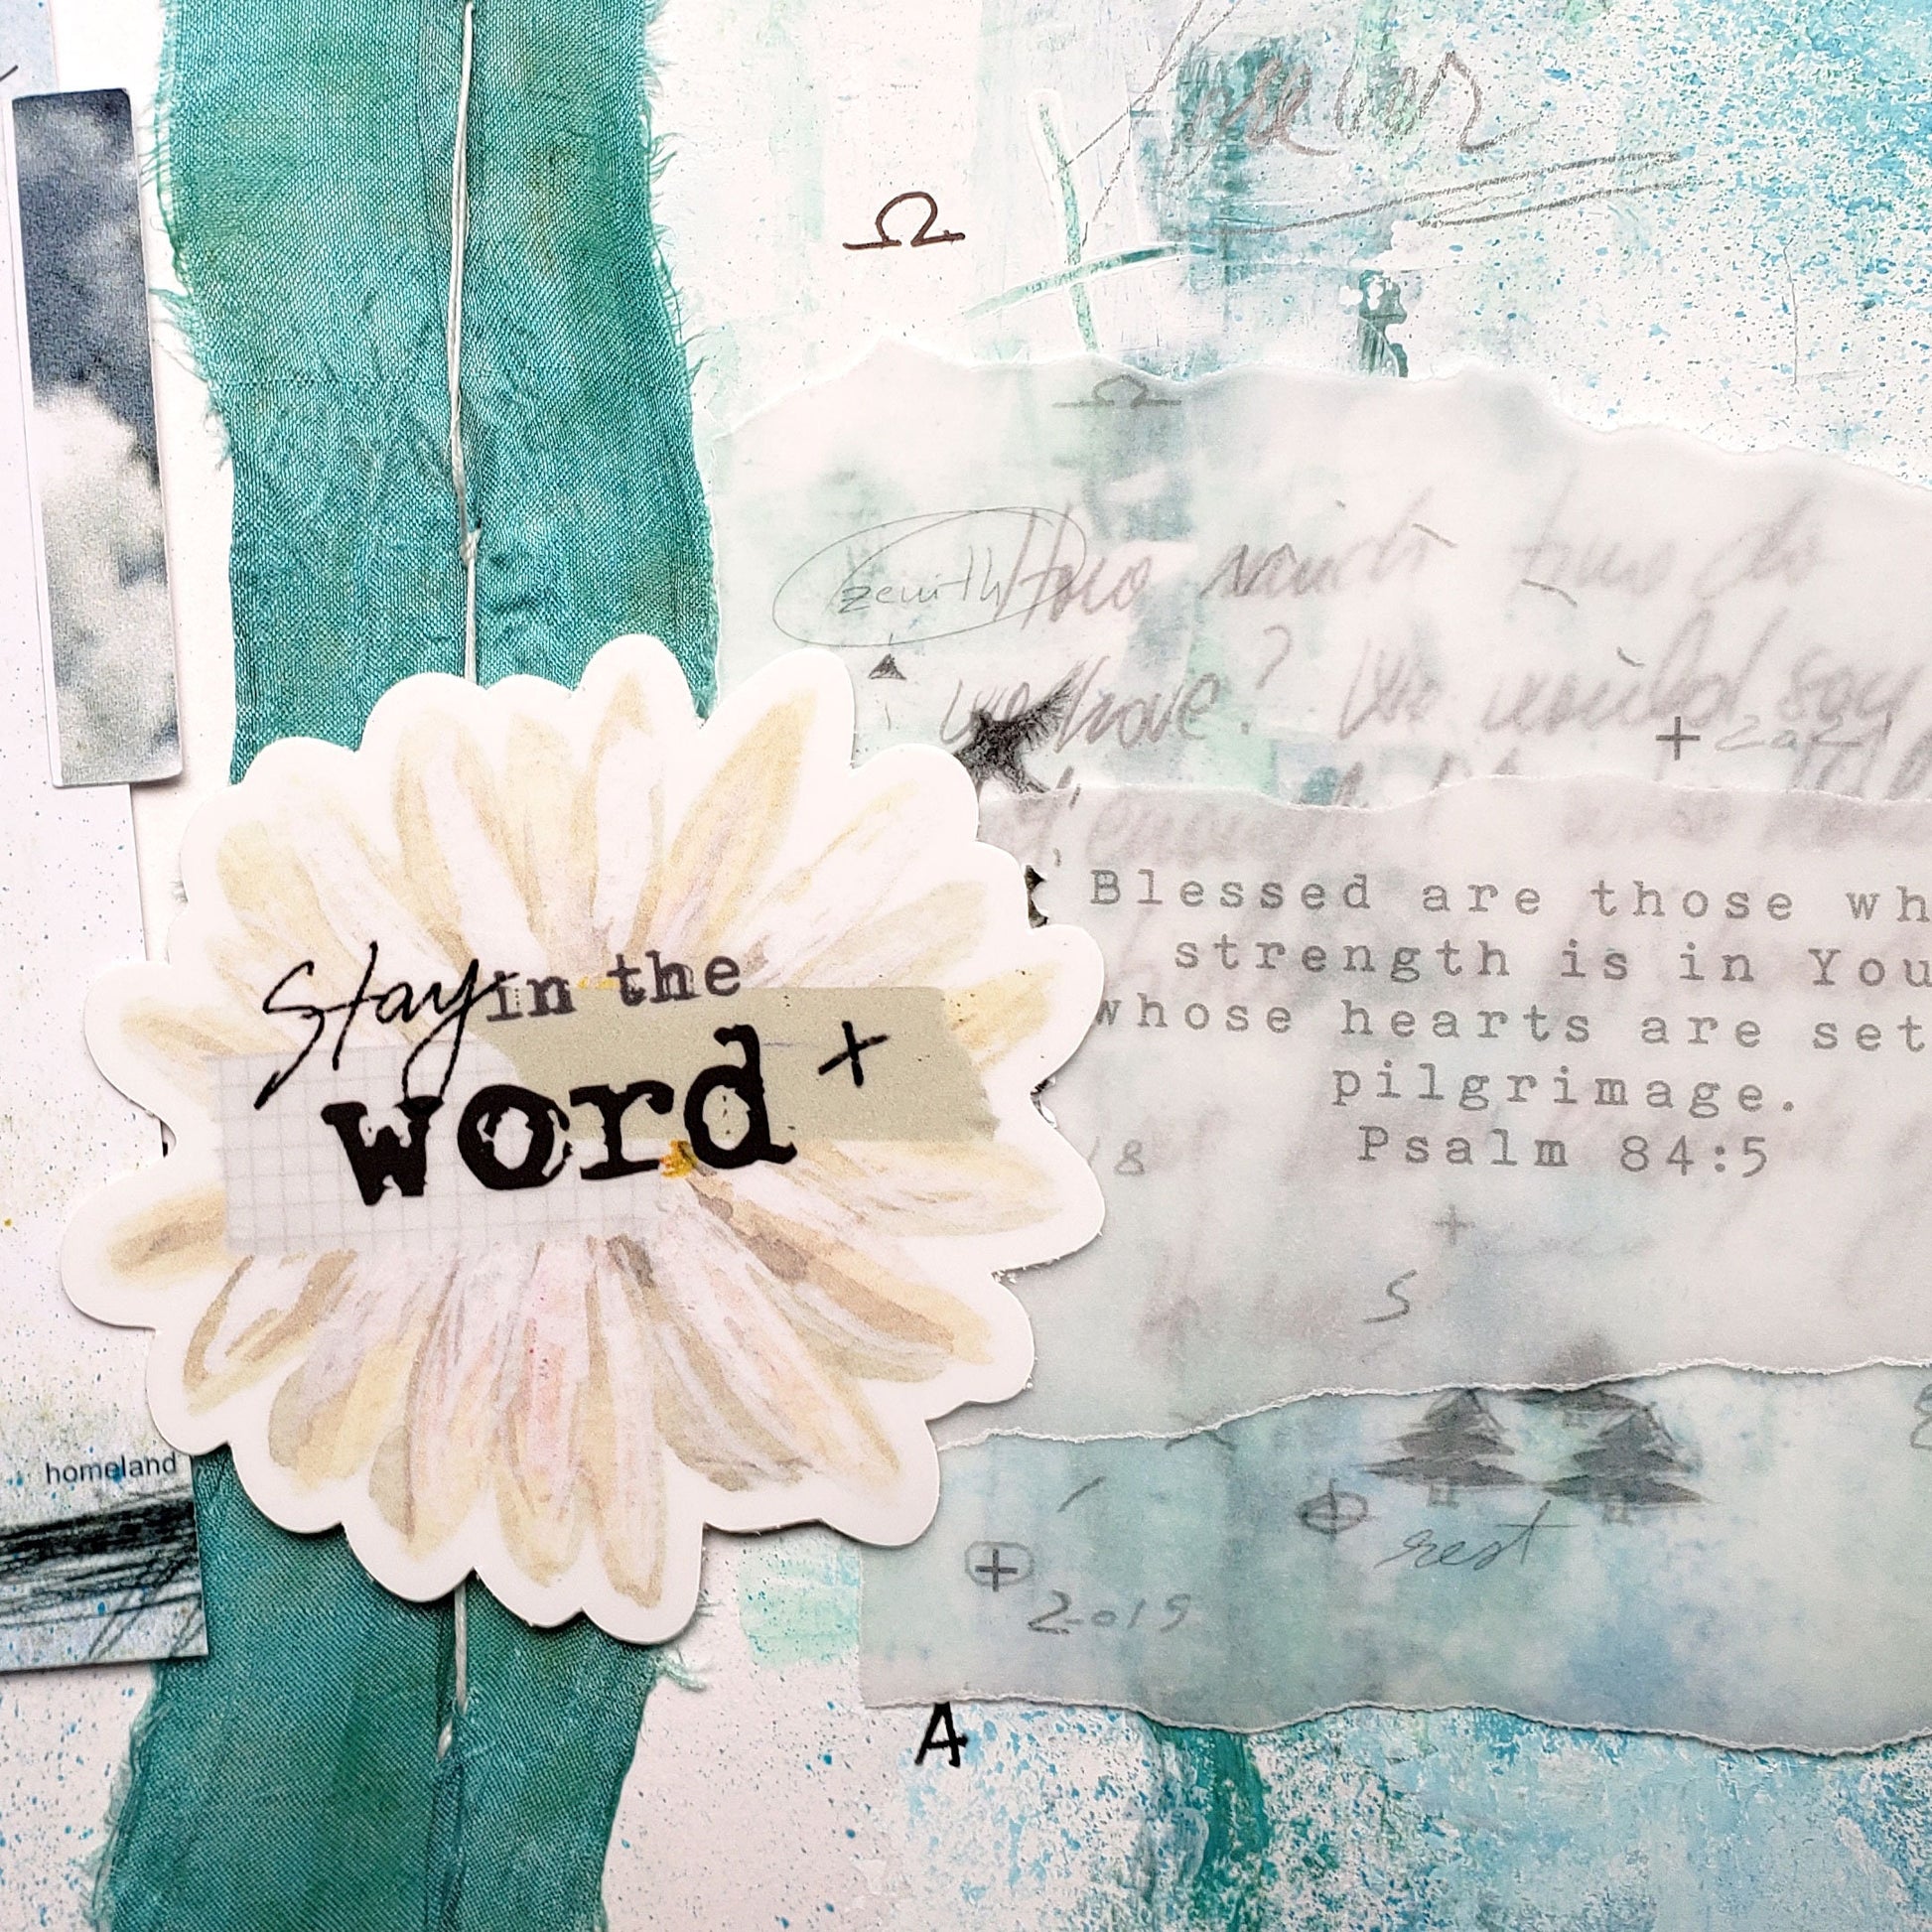 Stay in the Word - sticker